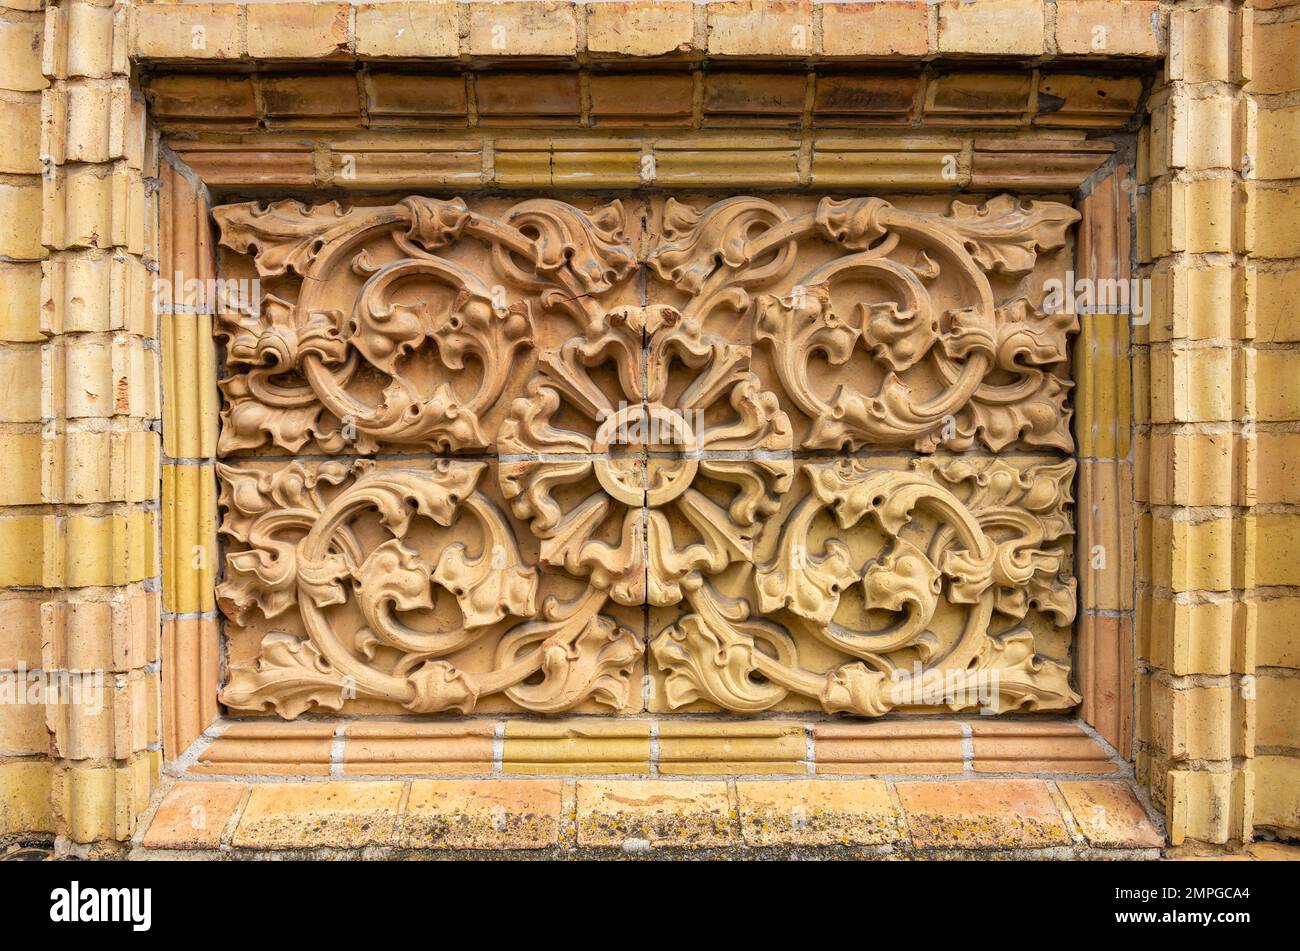 Historic exterior architectural detail with tendril ornamentation made of brick material. Stock Photo